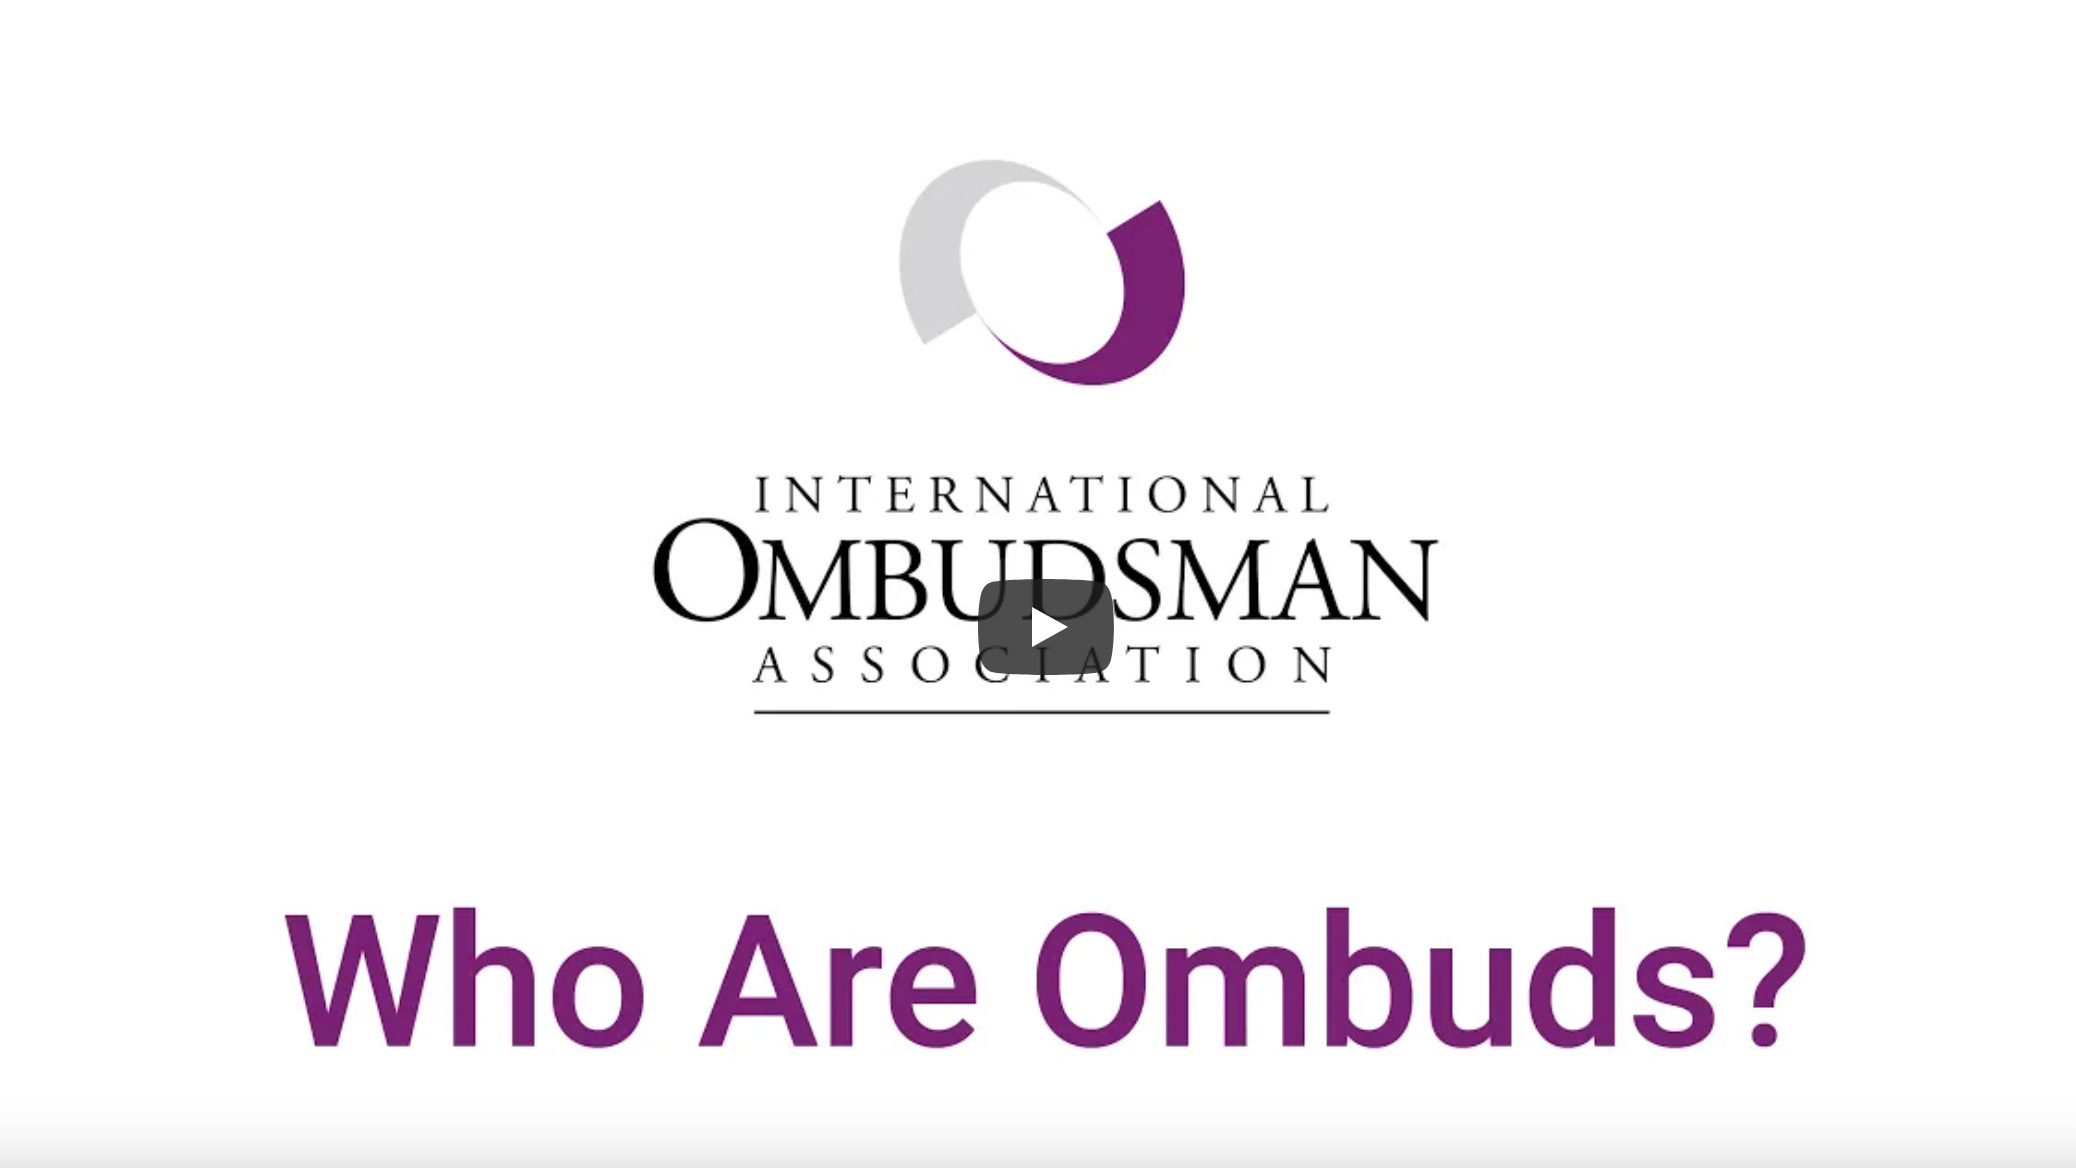 The Youtube play icon superimposed over the International Ombudsman Association logo with text below reading What are Ombuds?